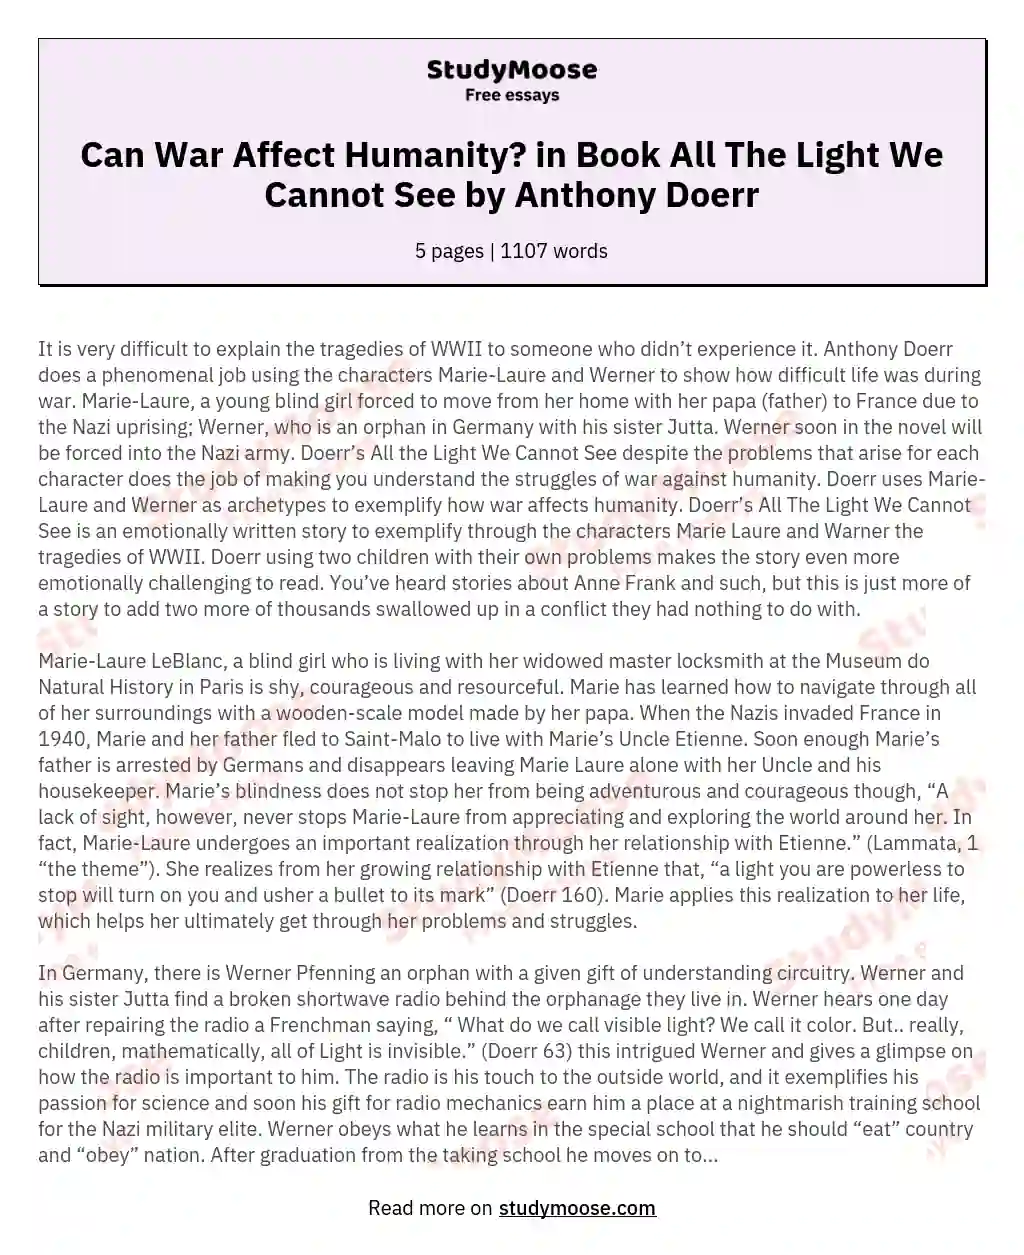 Can War Affect Humanity? in Book All The Light We Cannot See by Anthony Doerr essay